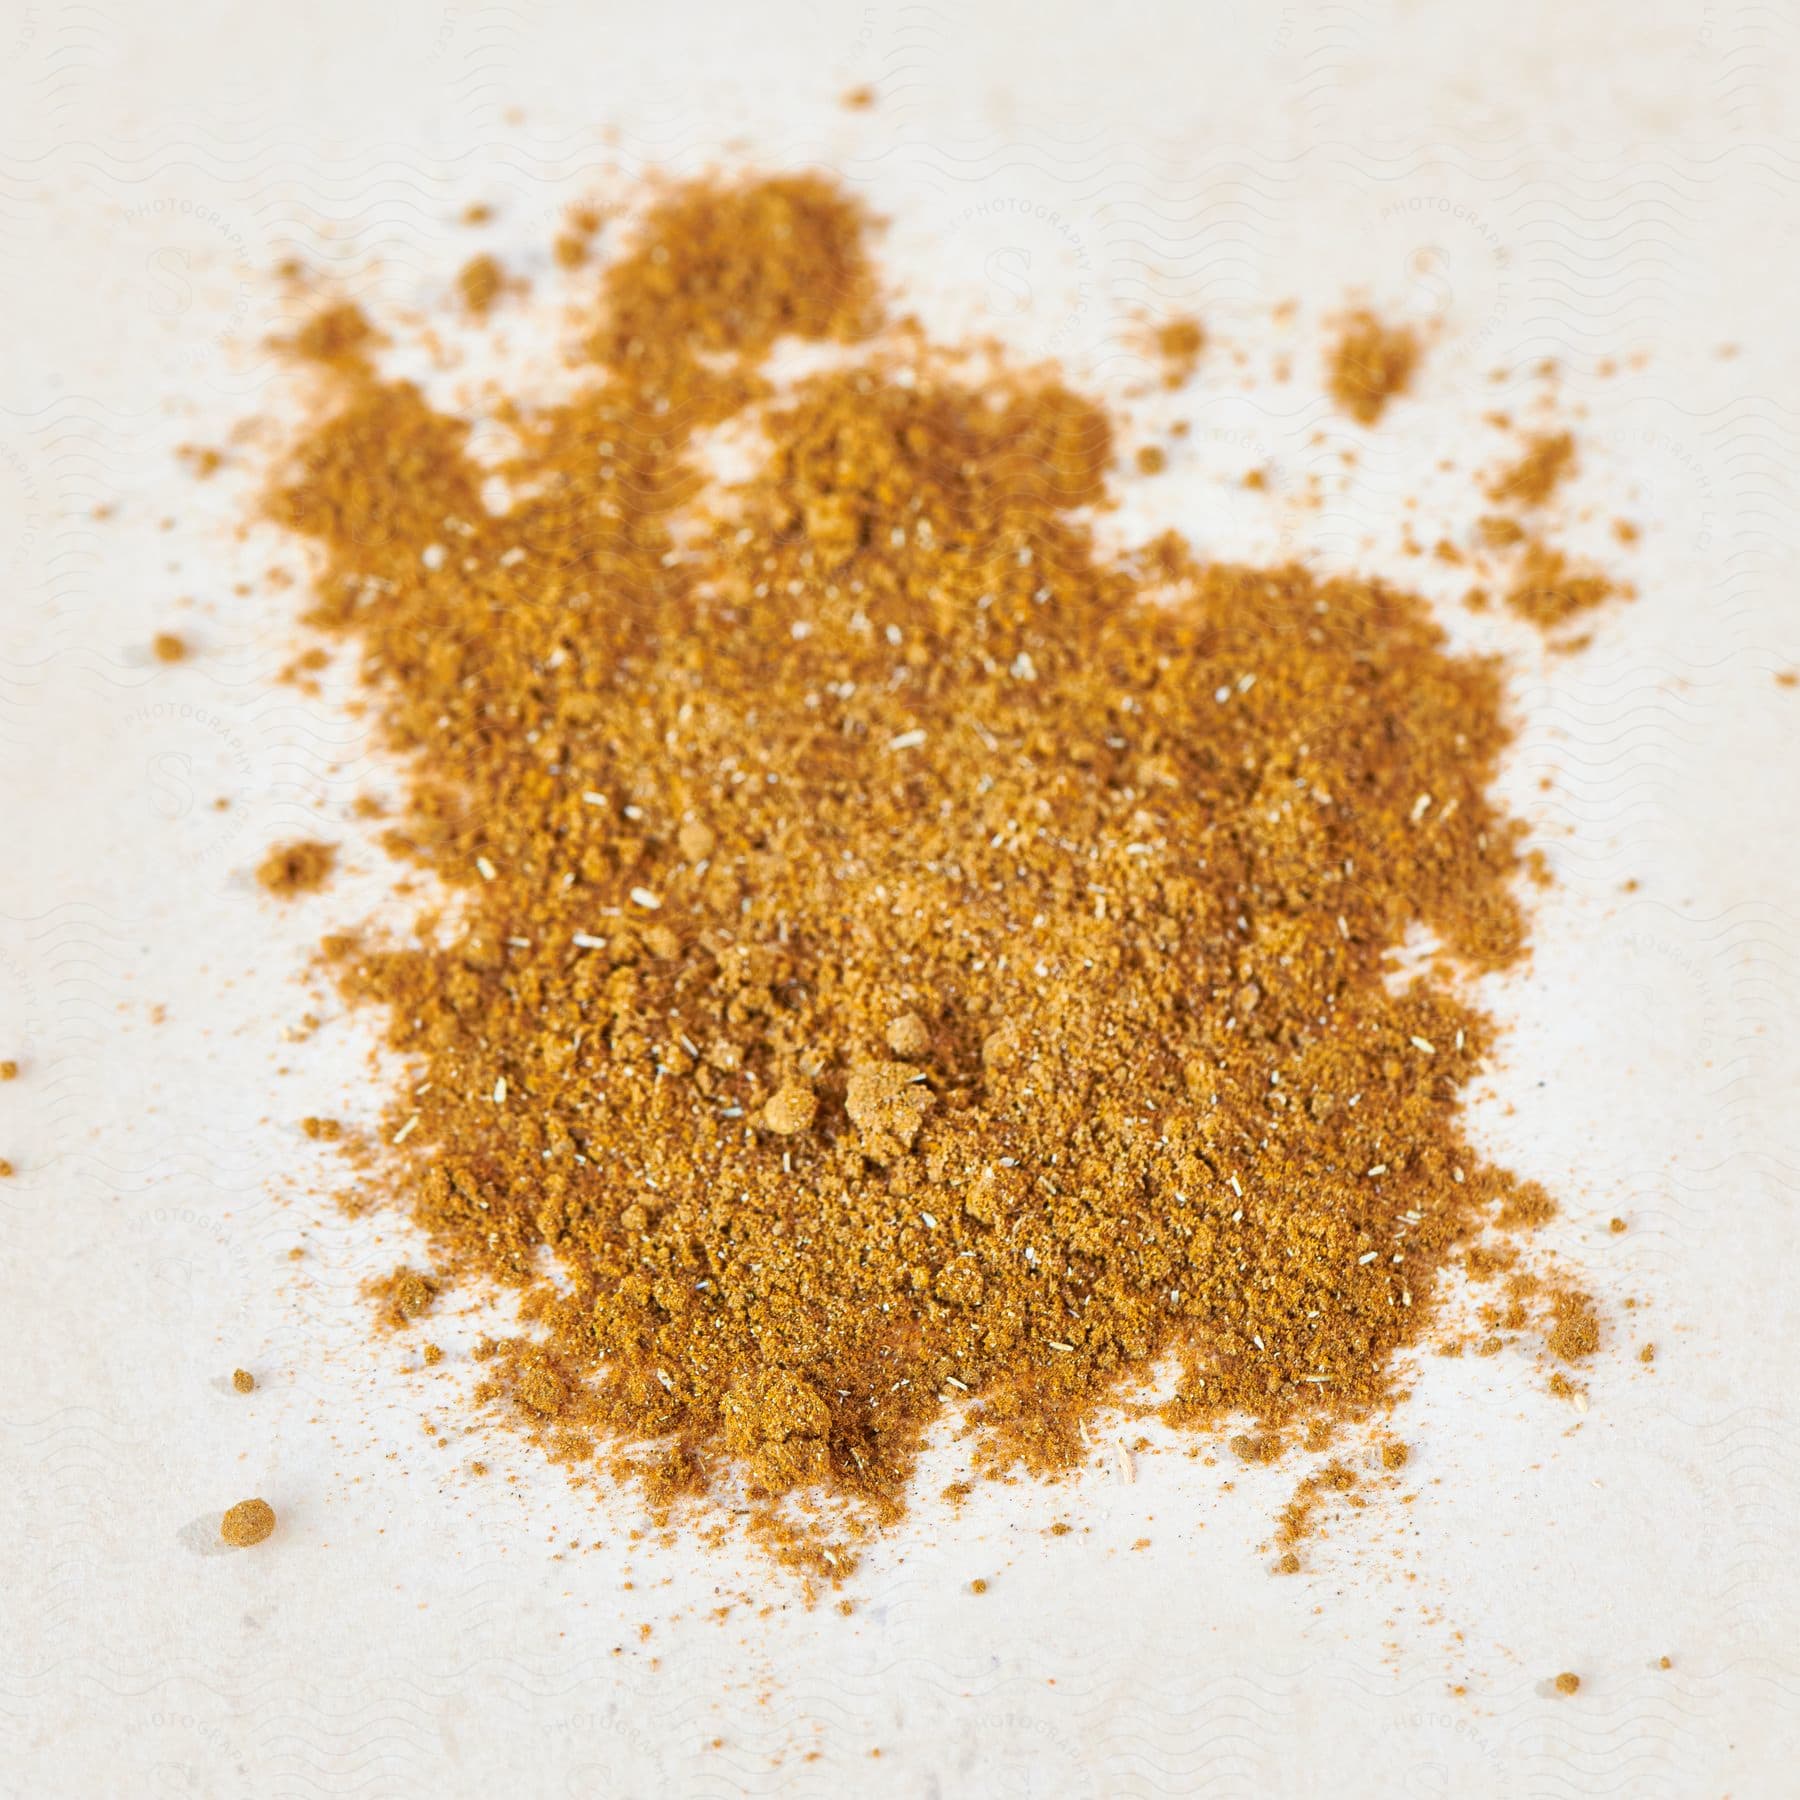 Close up of orange powder substance with white flakes on a white background